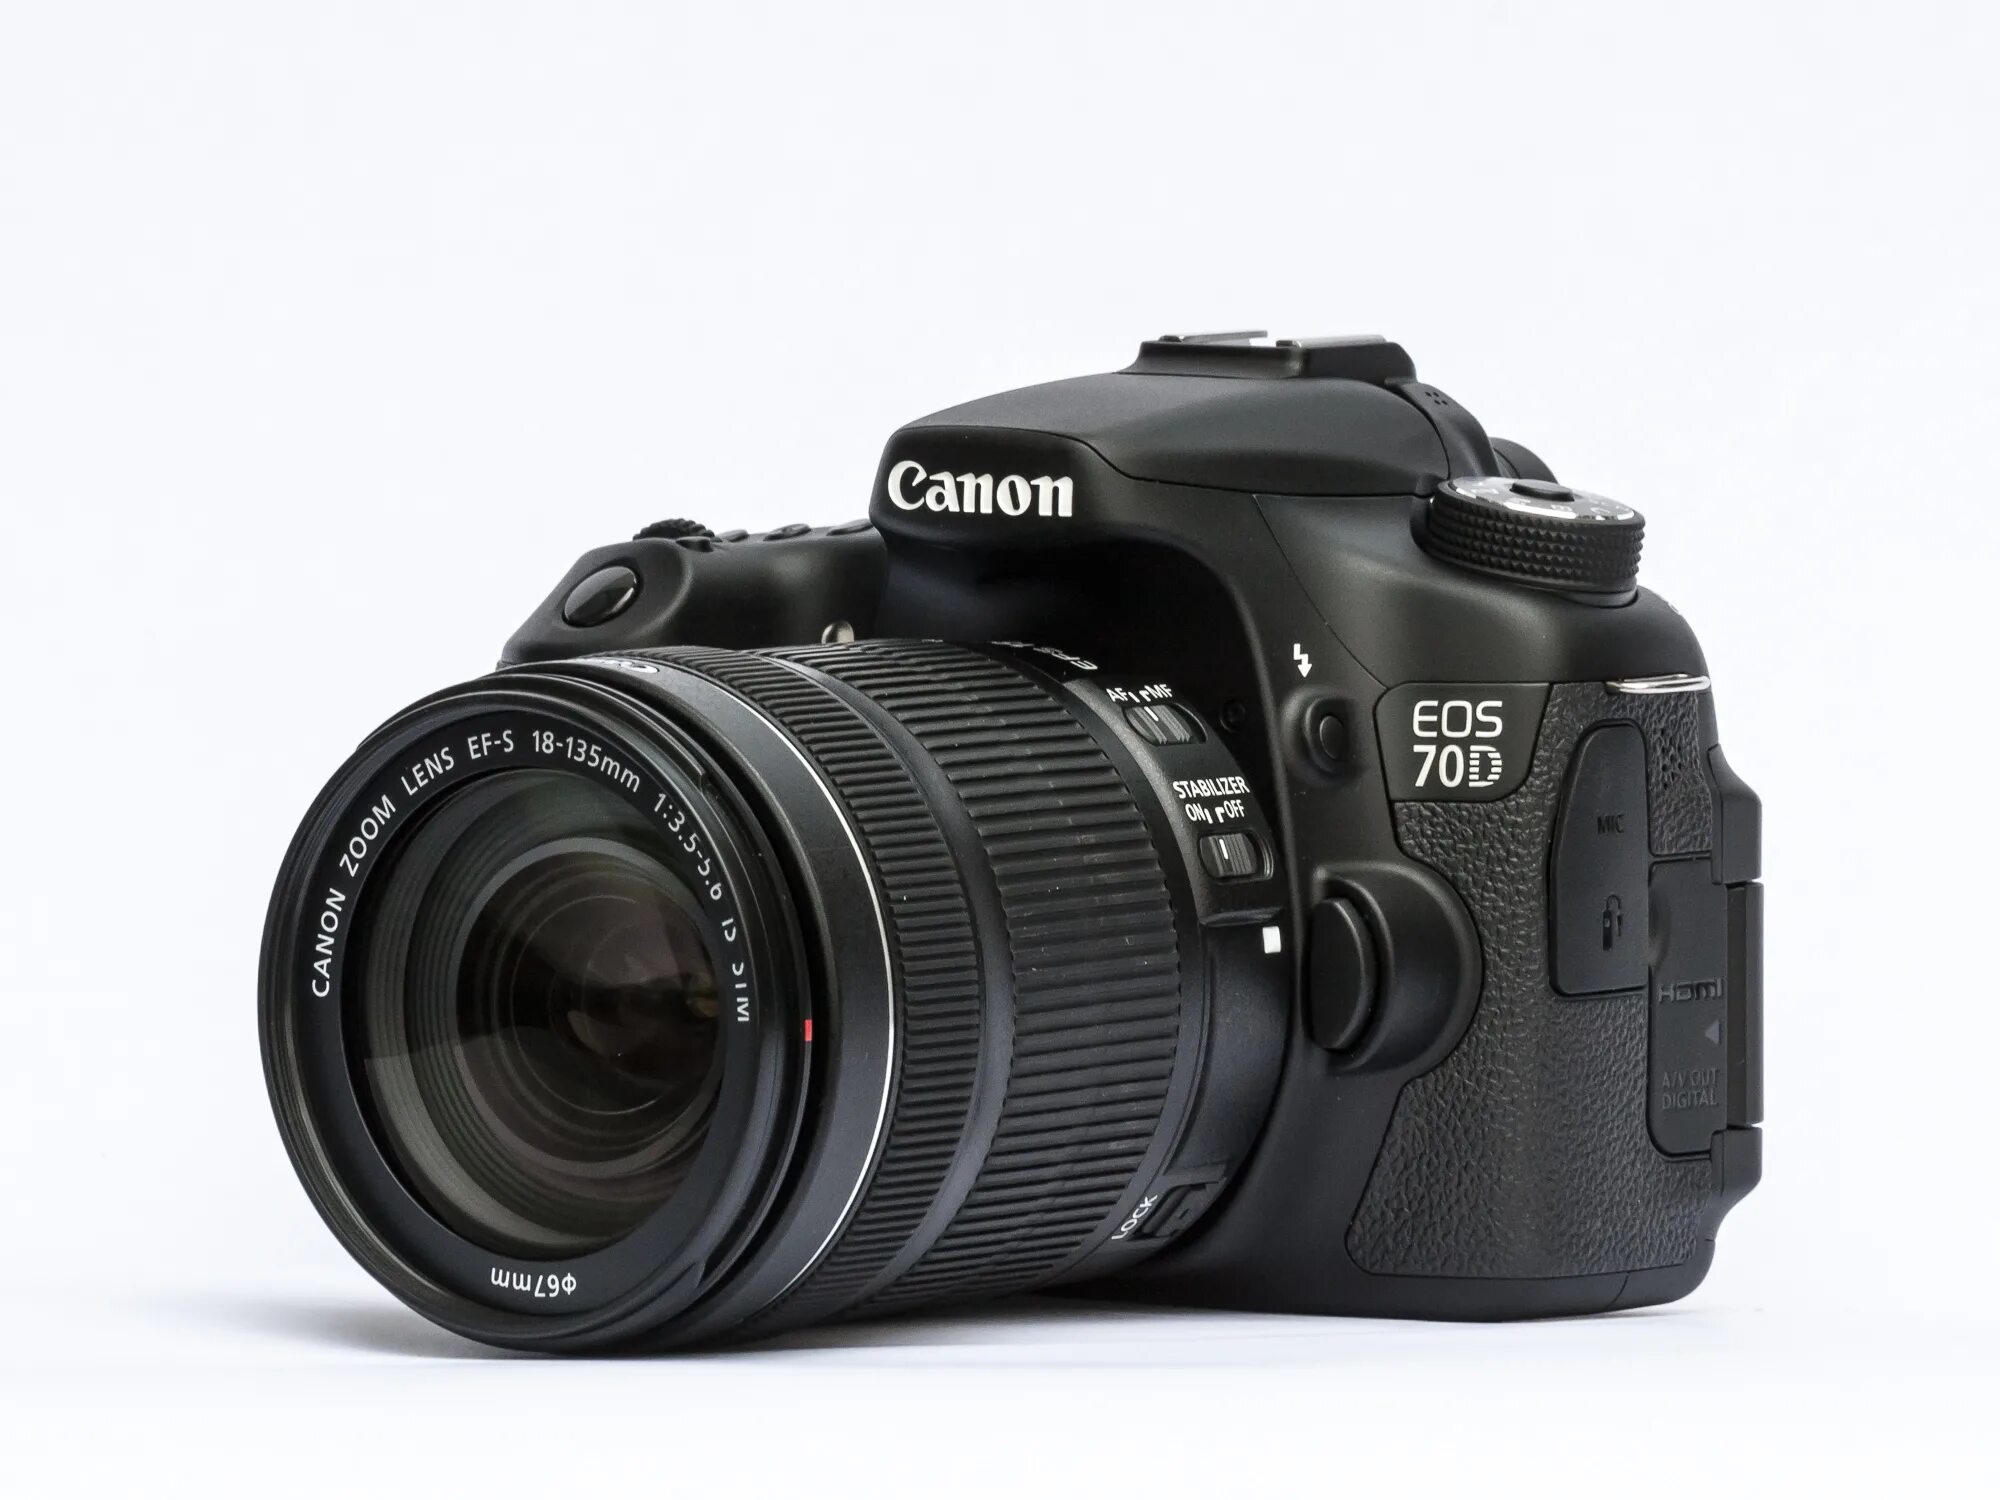 Санон. Canon EOS 70d body. Камера Canon 70d. EOS 70d. Canon EOS 60d.